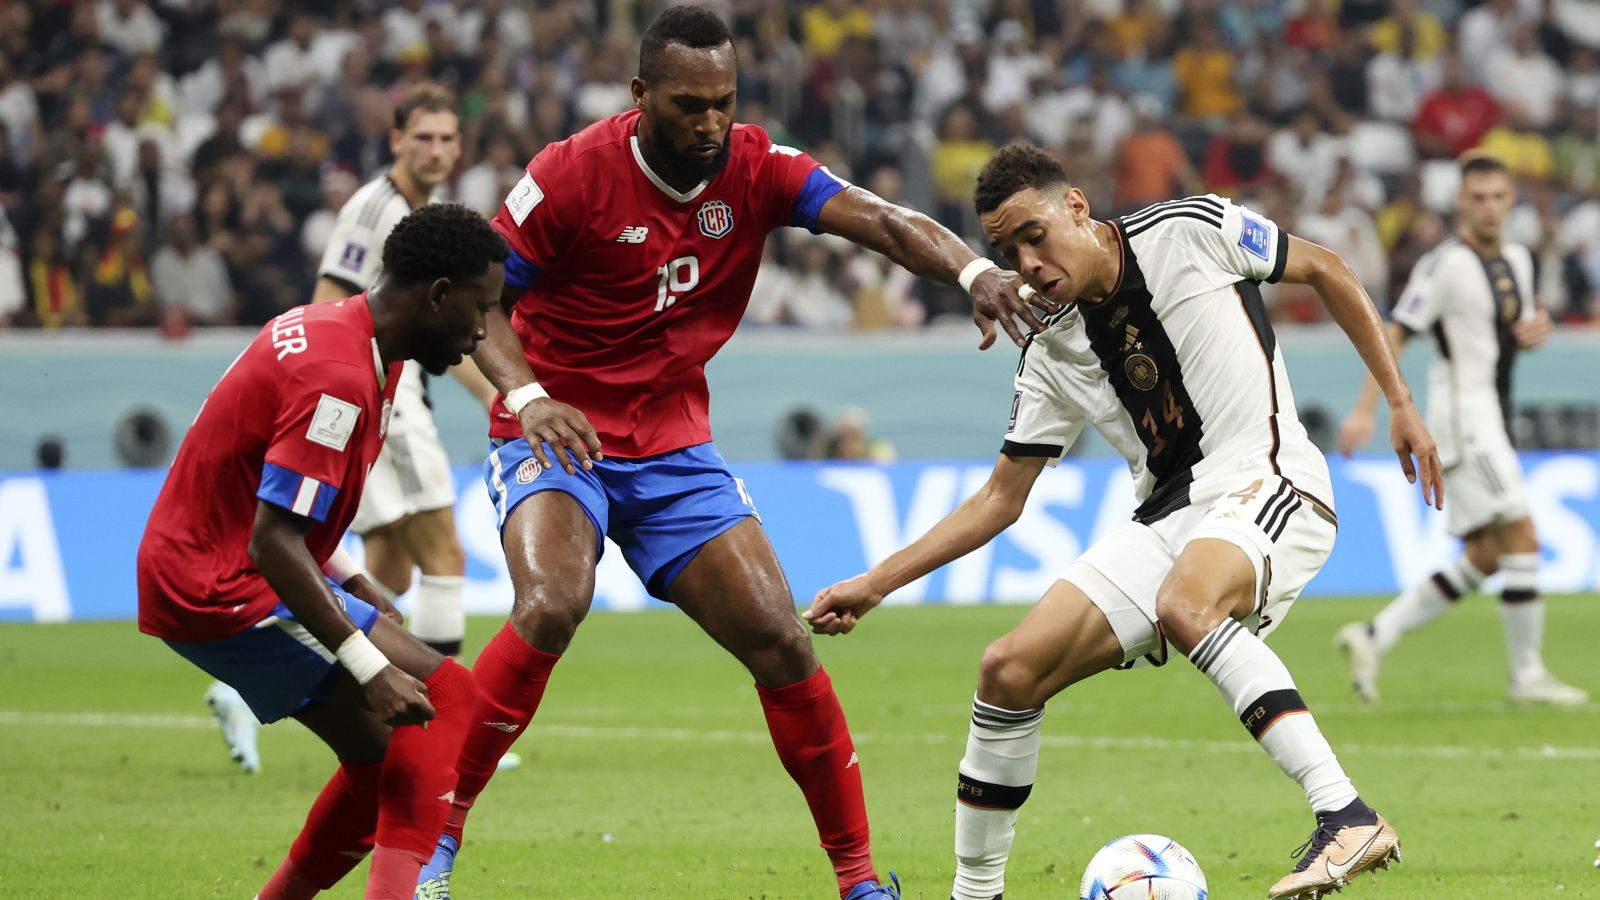 Qatar World Cup 2022: Germany vs Costa Rica - ‘Germany crash out’